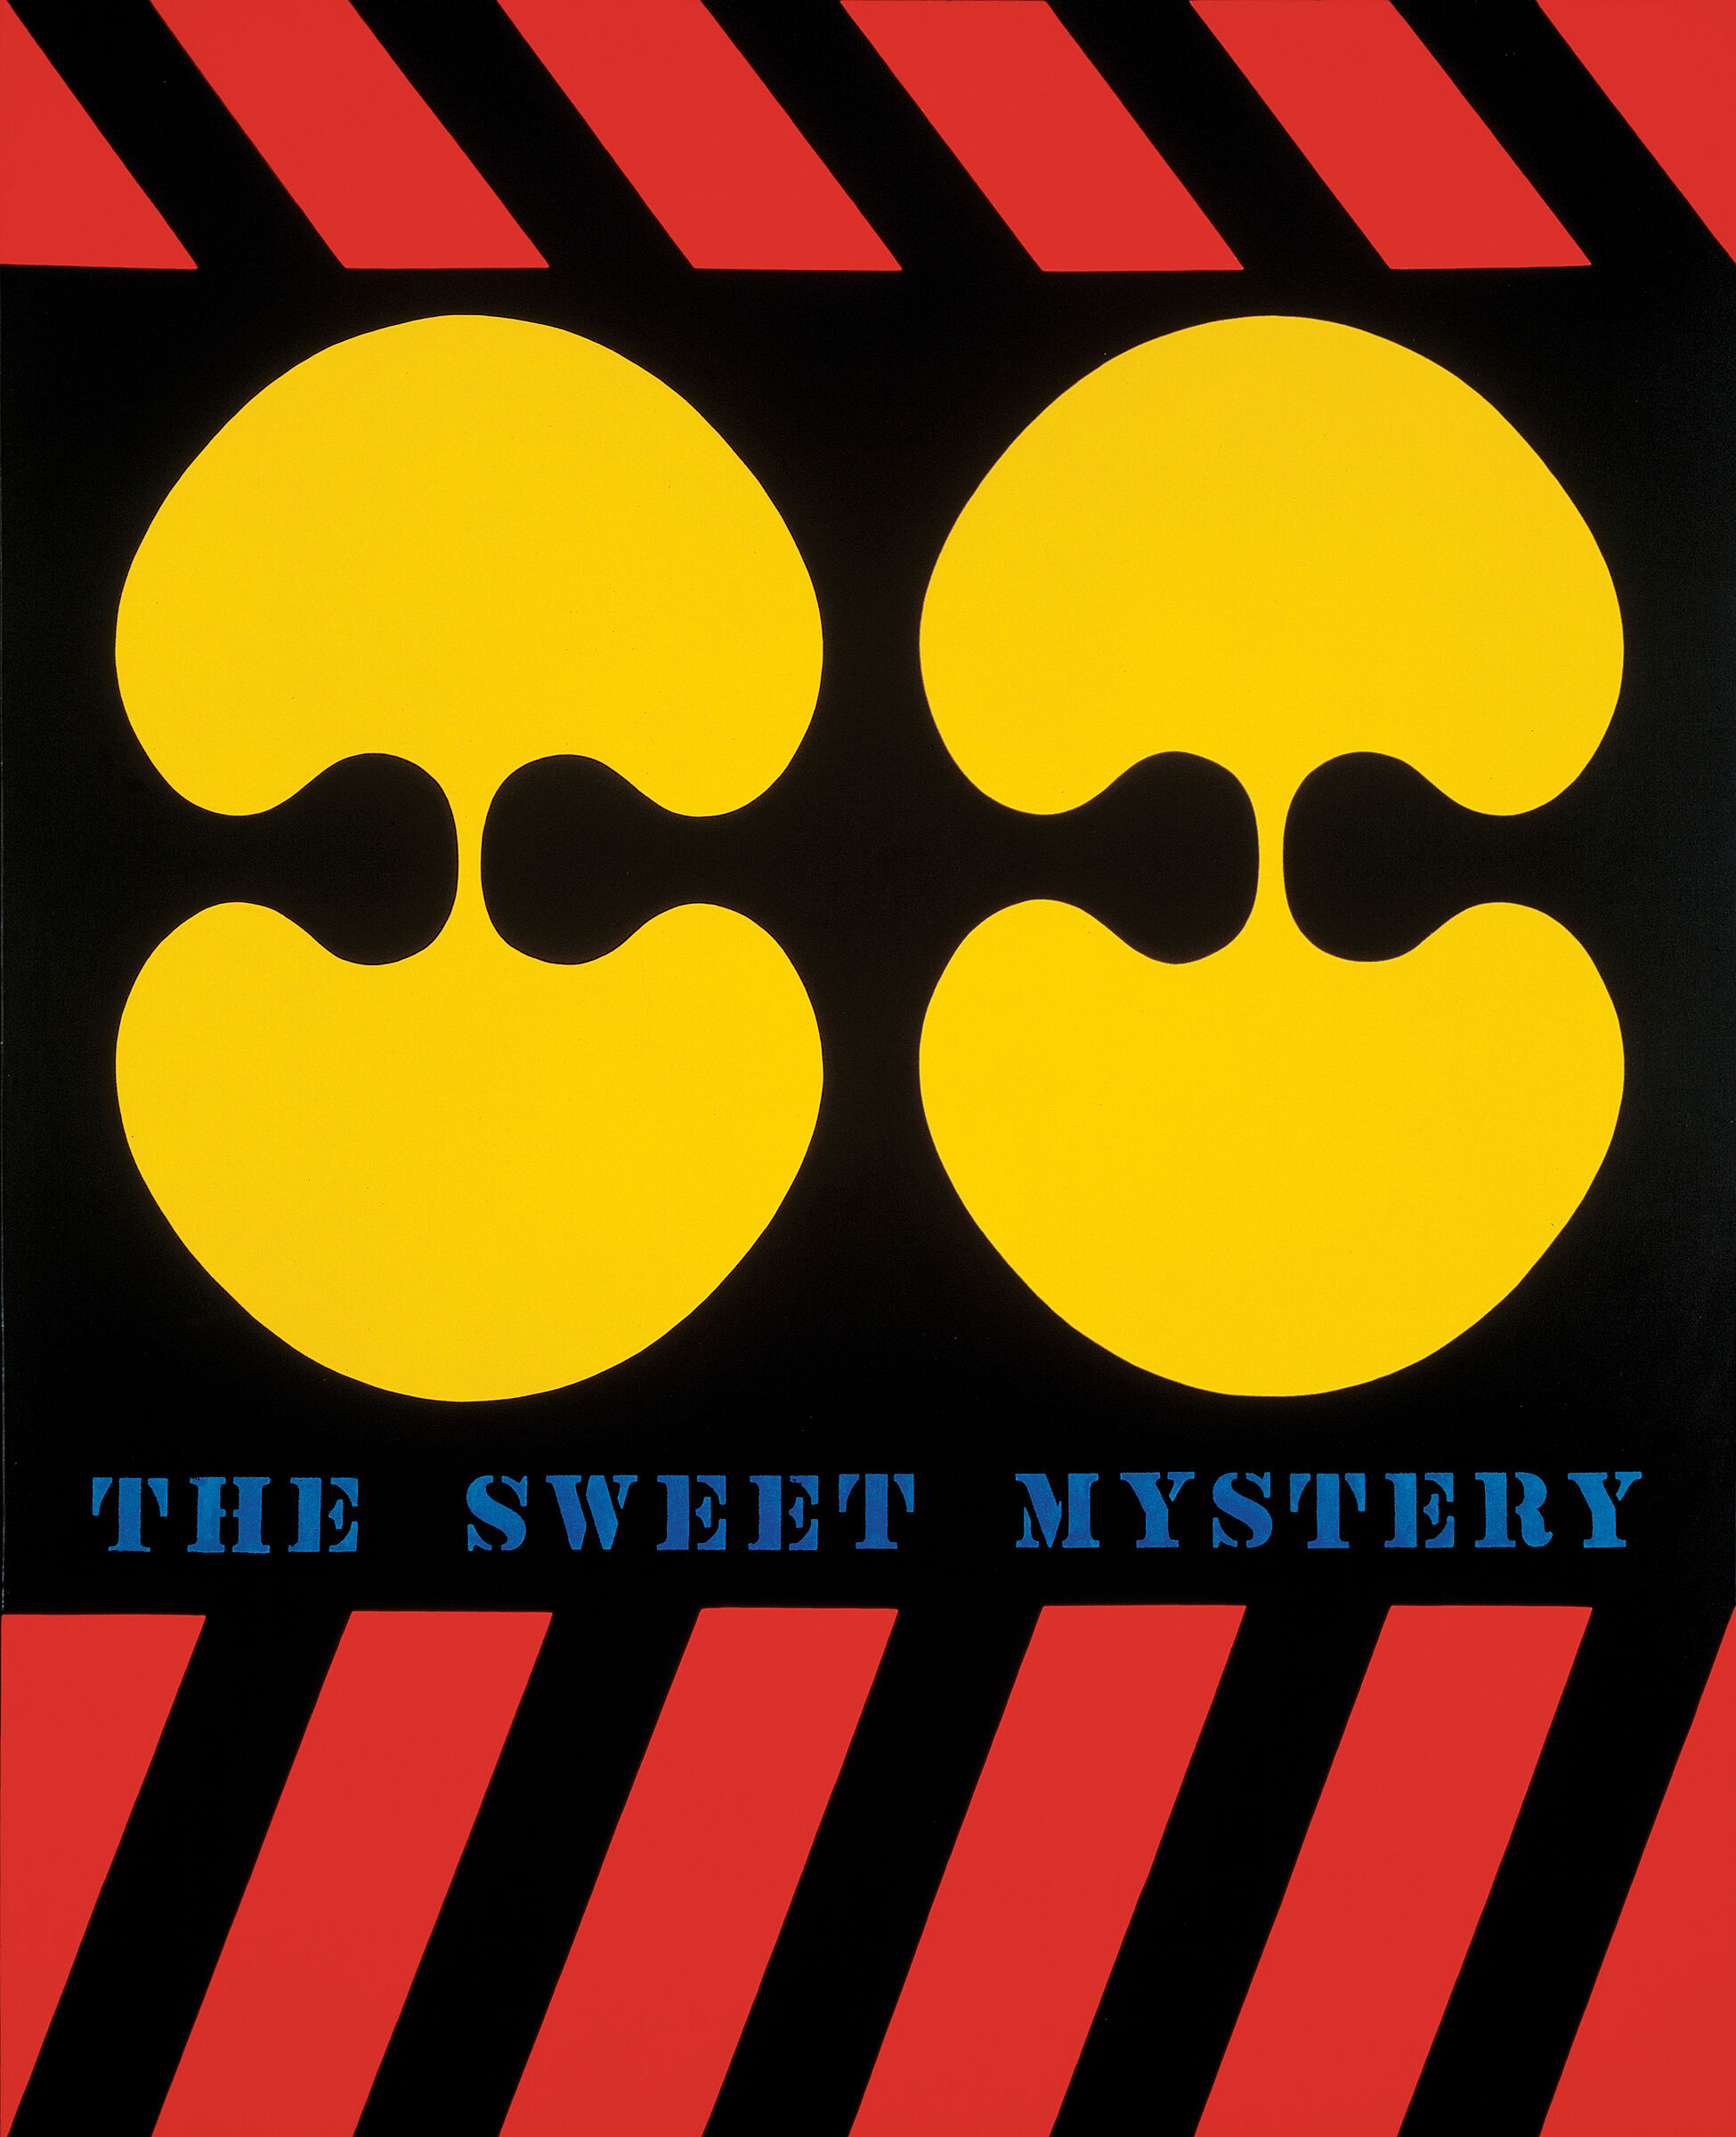 Red diagonal stripes on the top and bottom of the image sandwich two curved yellow blobs that sit side by side. Below the yellow blobs is the text The Sweet Mystery in blue. Behind is black.